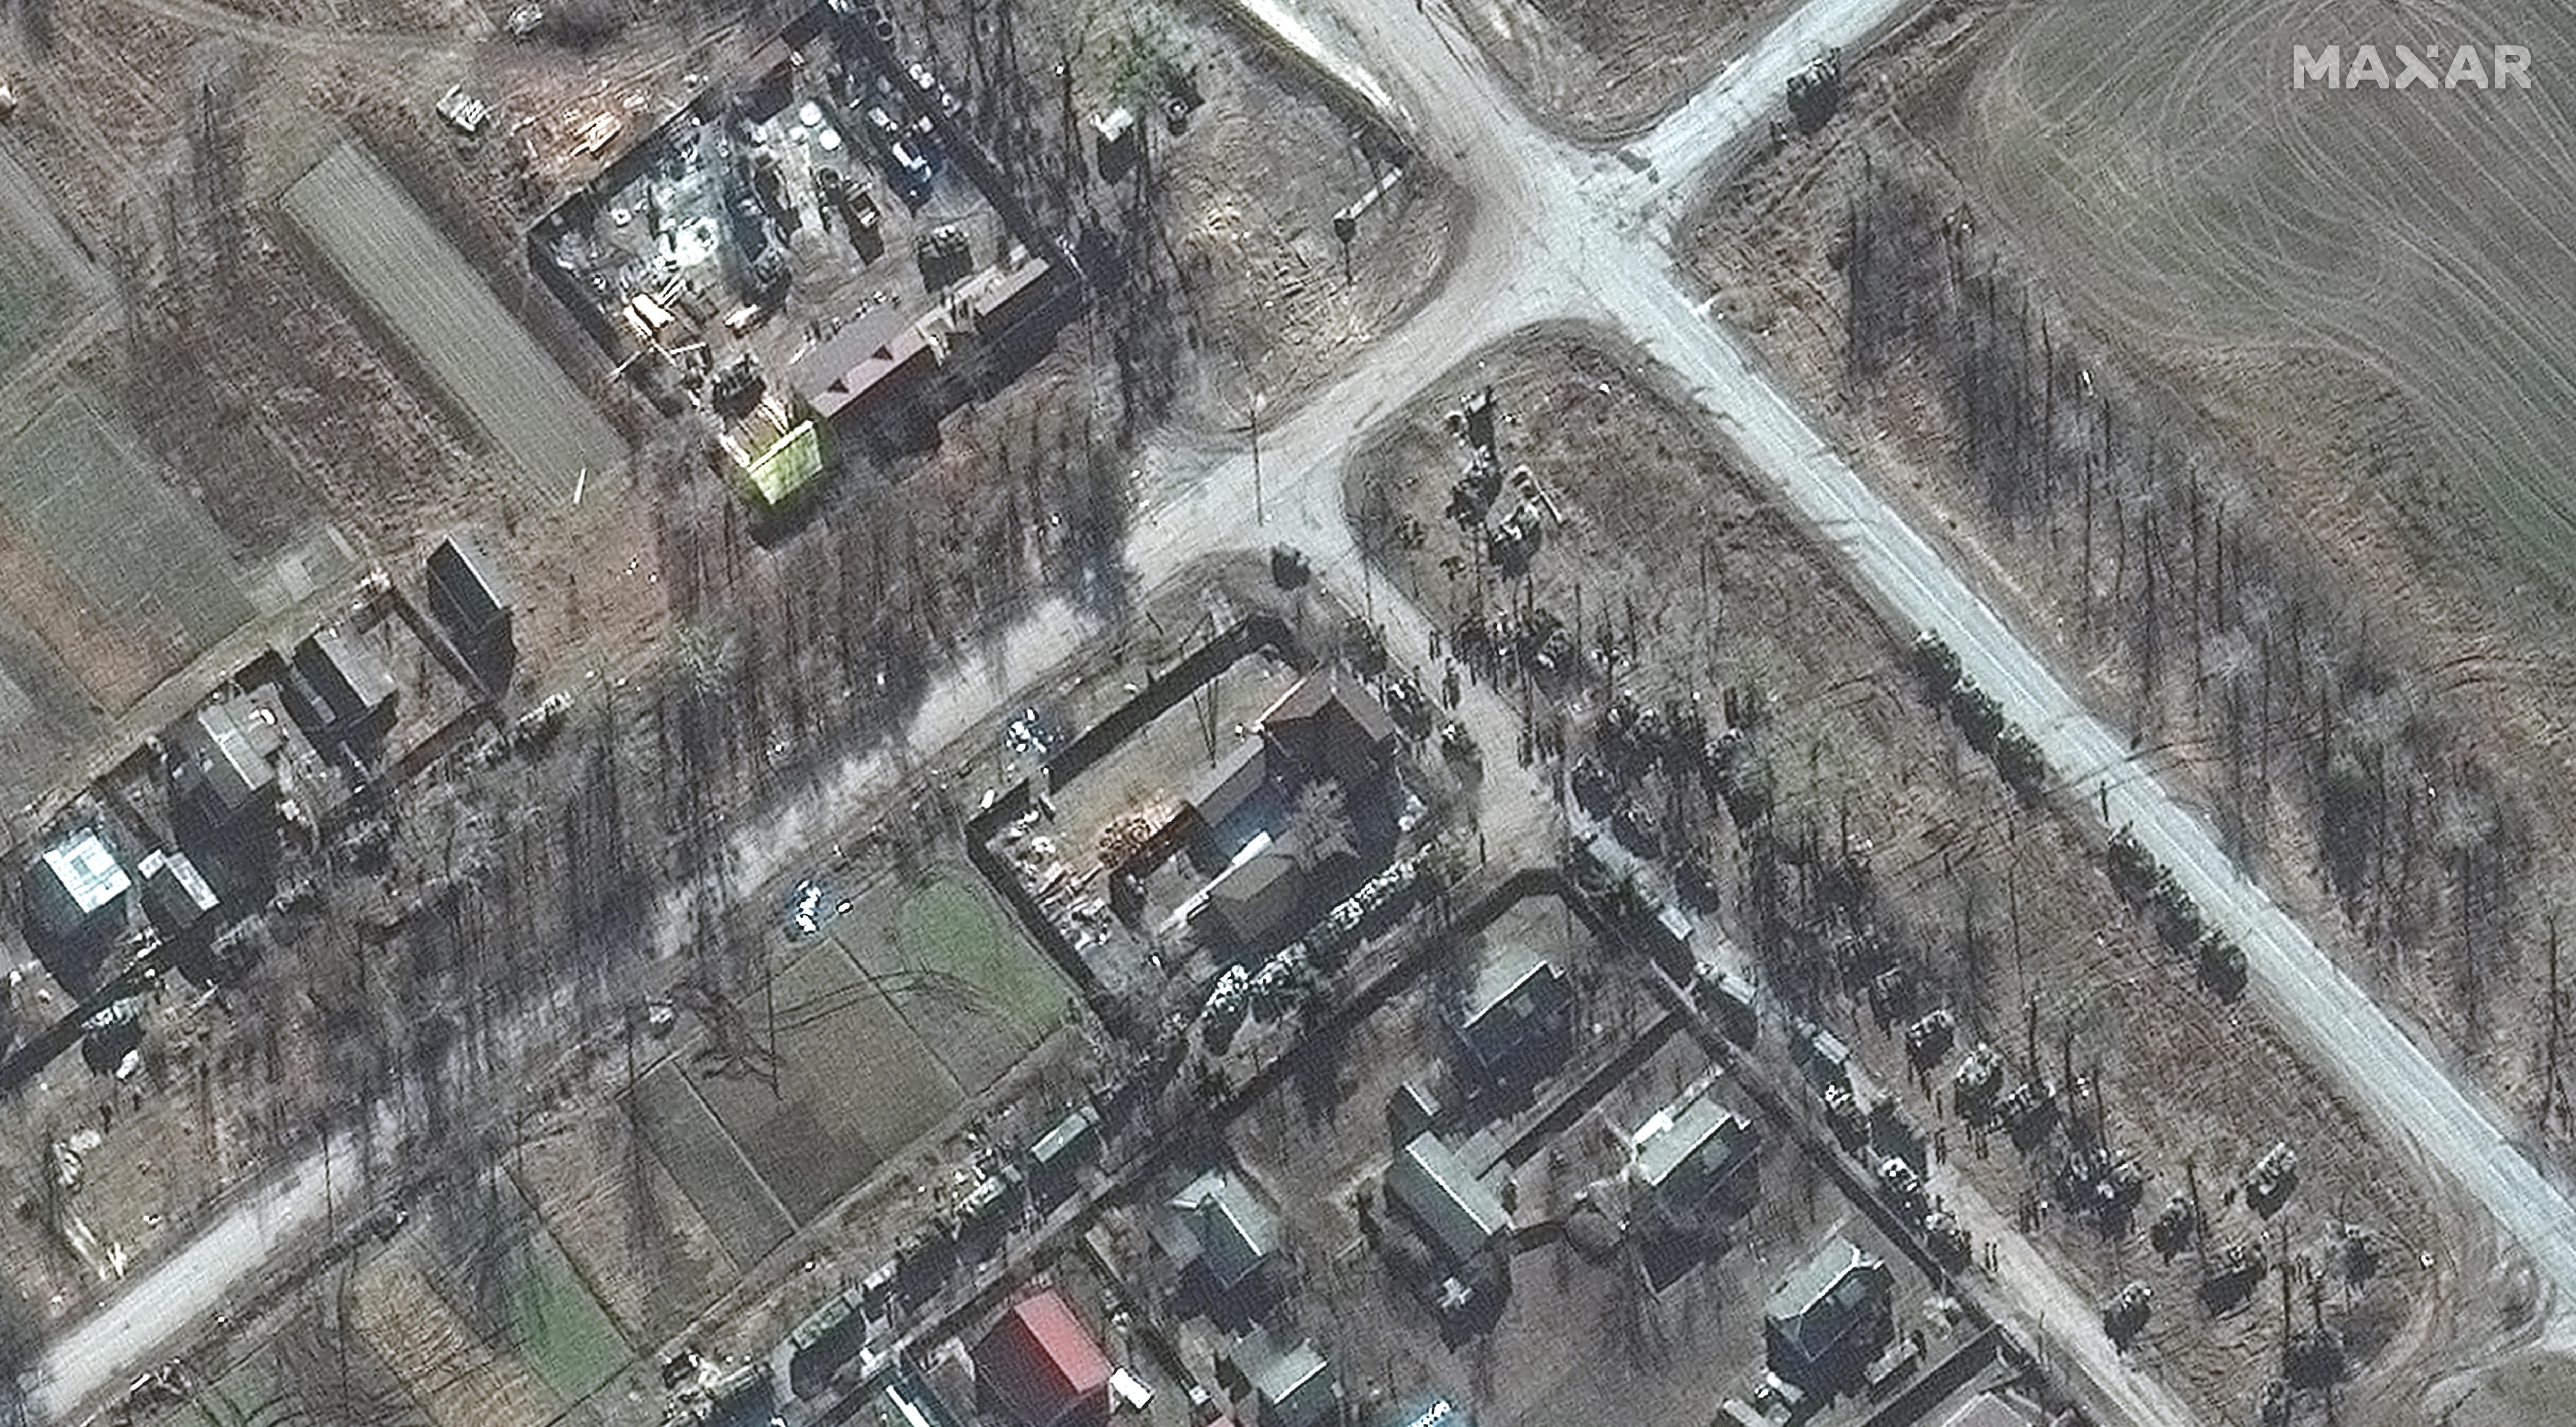 A close up showing soldiers getting out of trucks in a residential area in Ukraine.